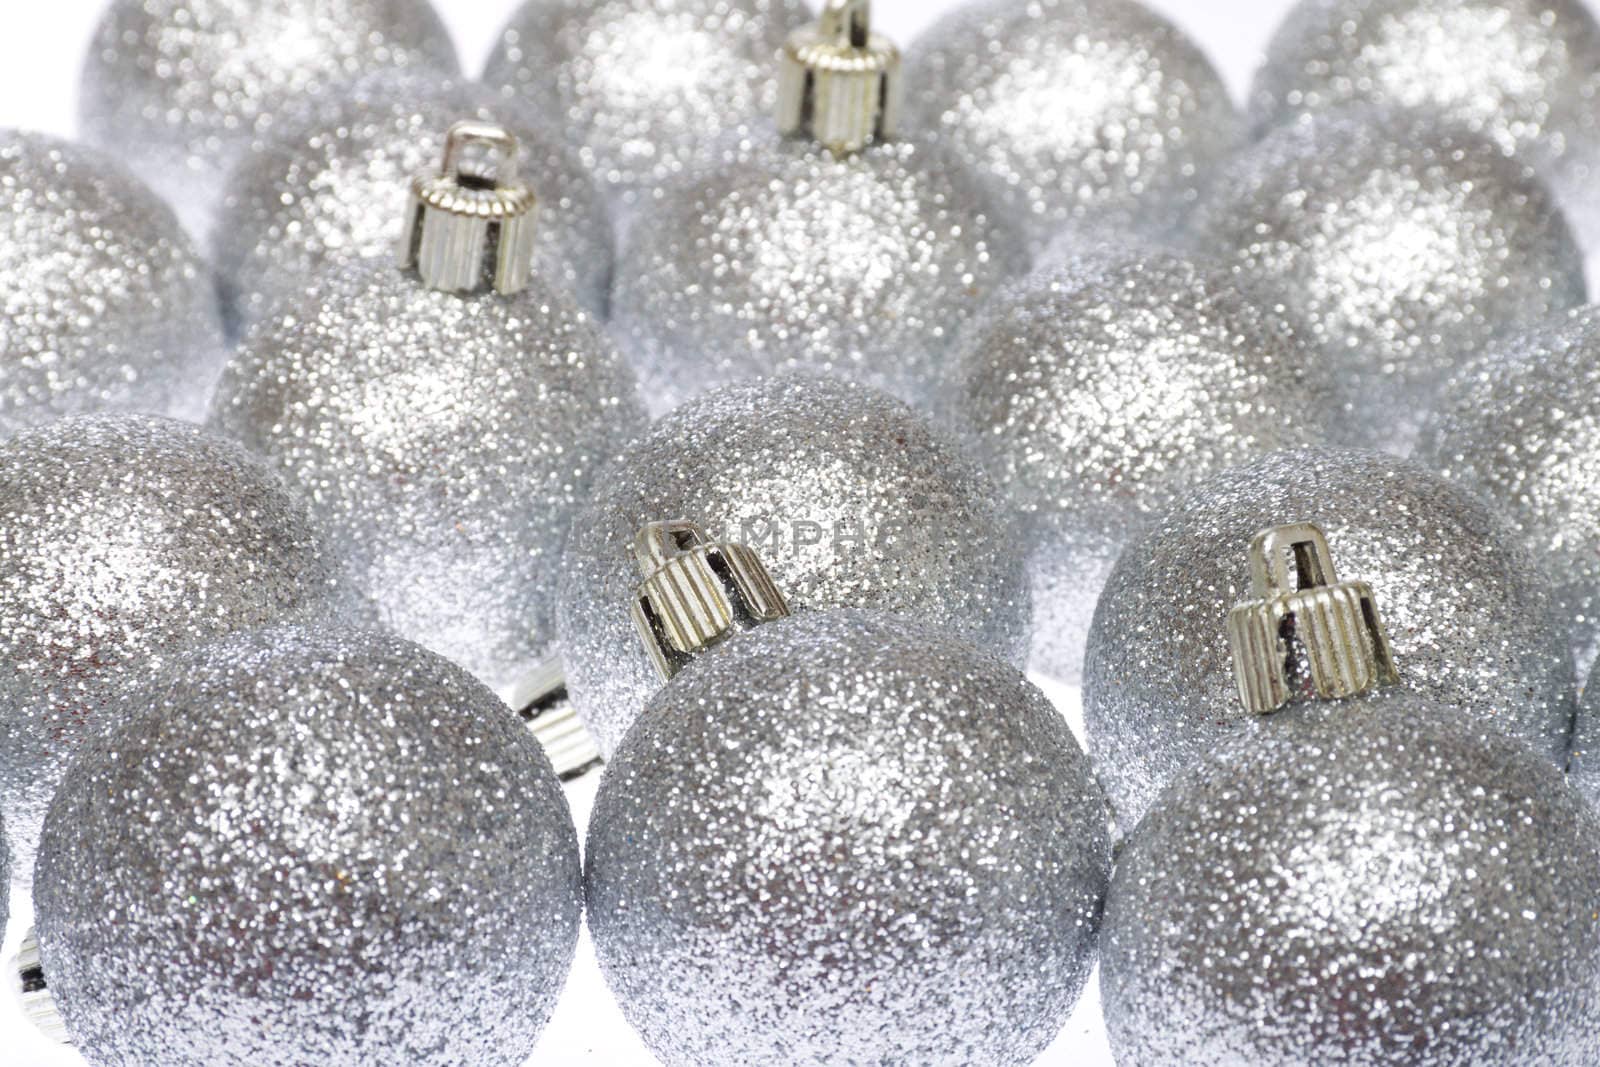 silver glass balls the Christmas, abstract holiday background